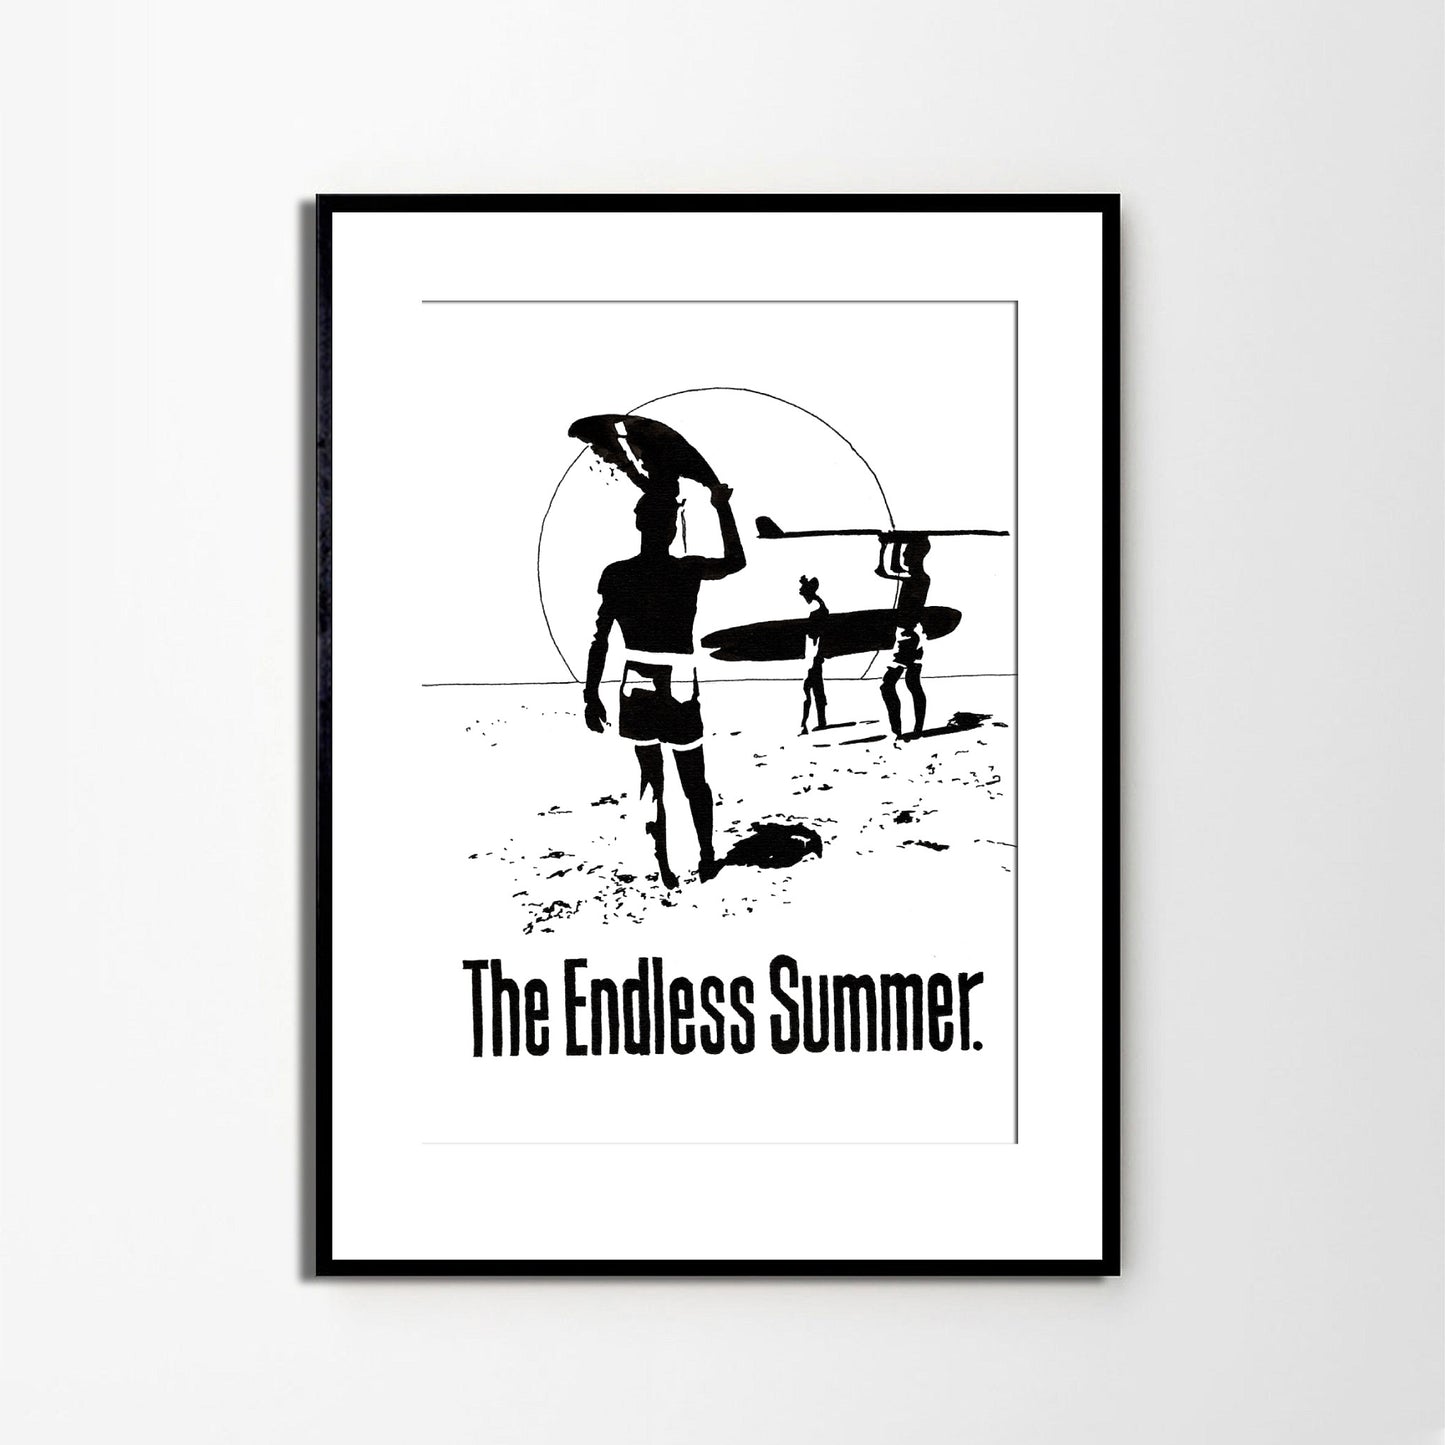 Surf: The Endless Summer